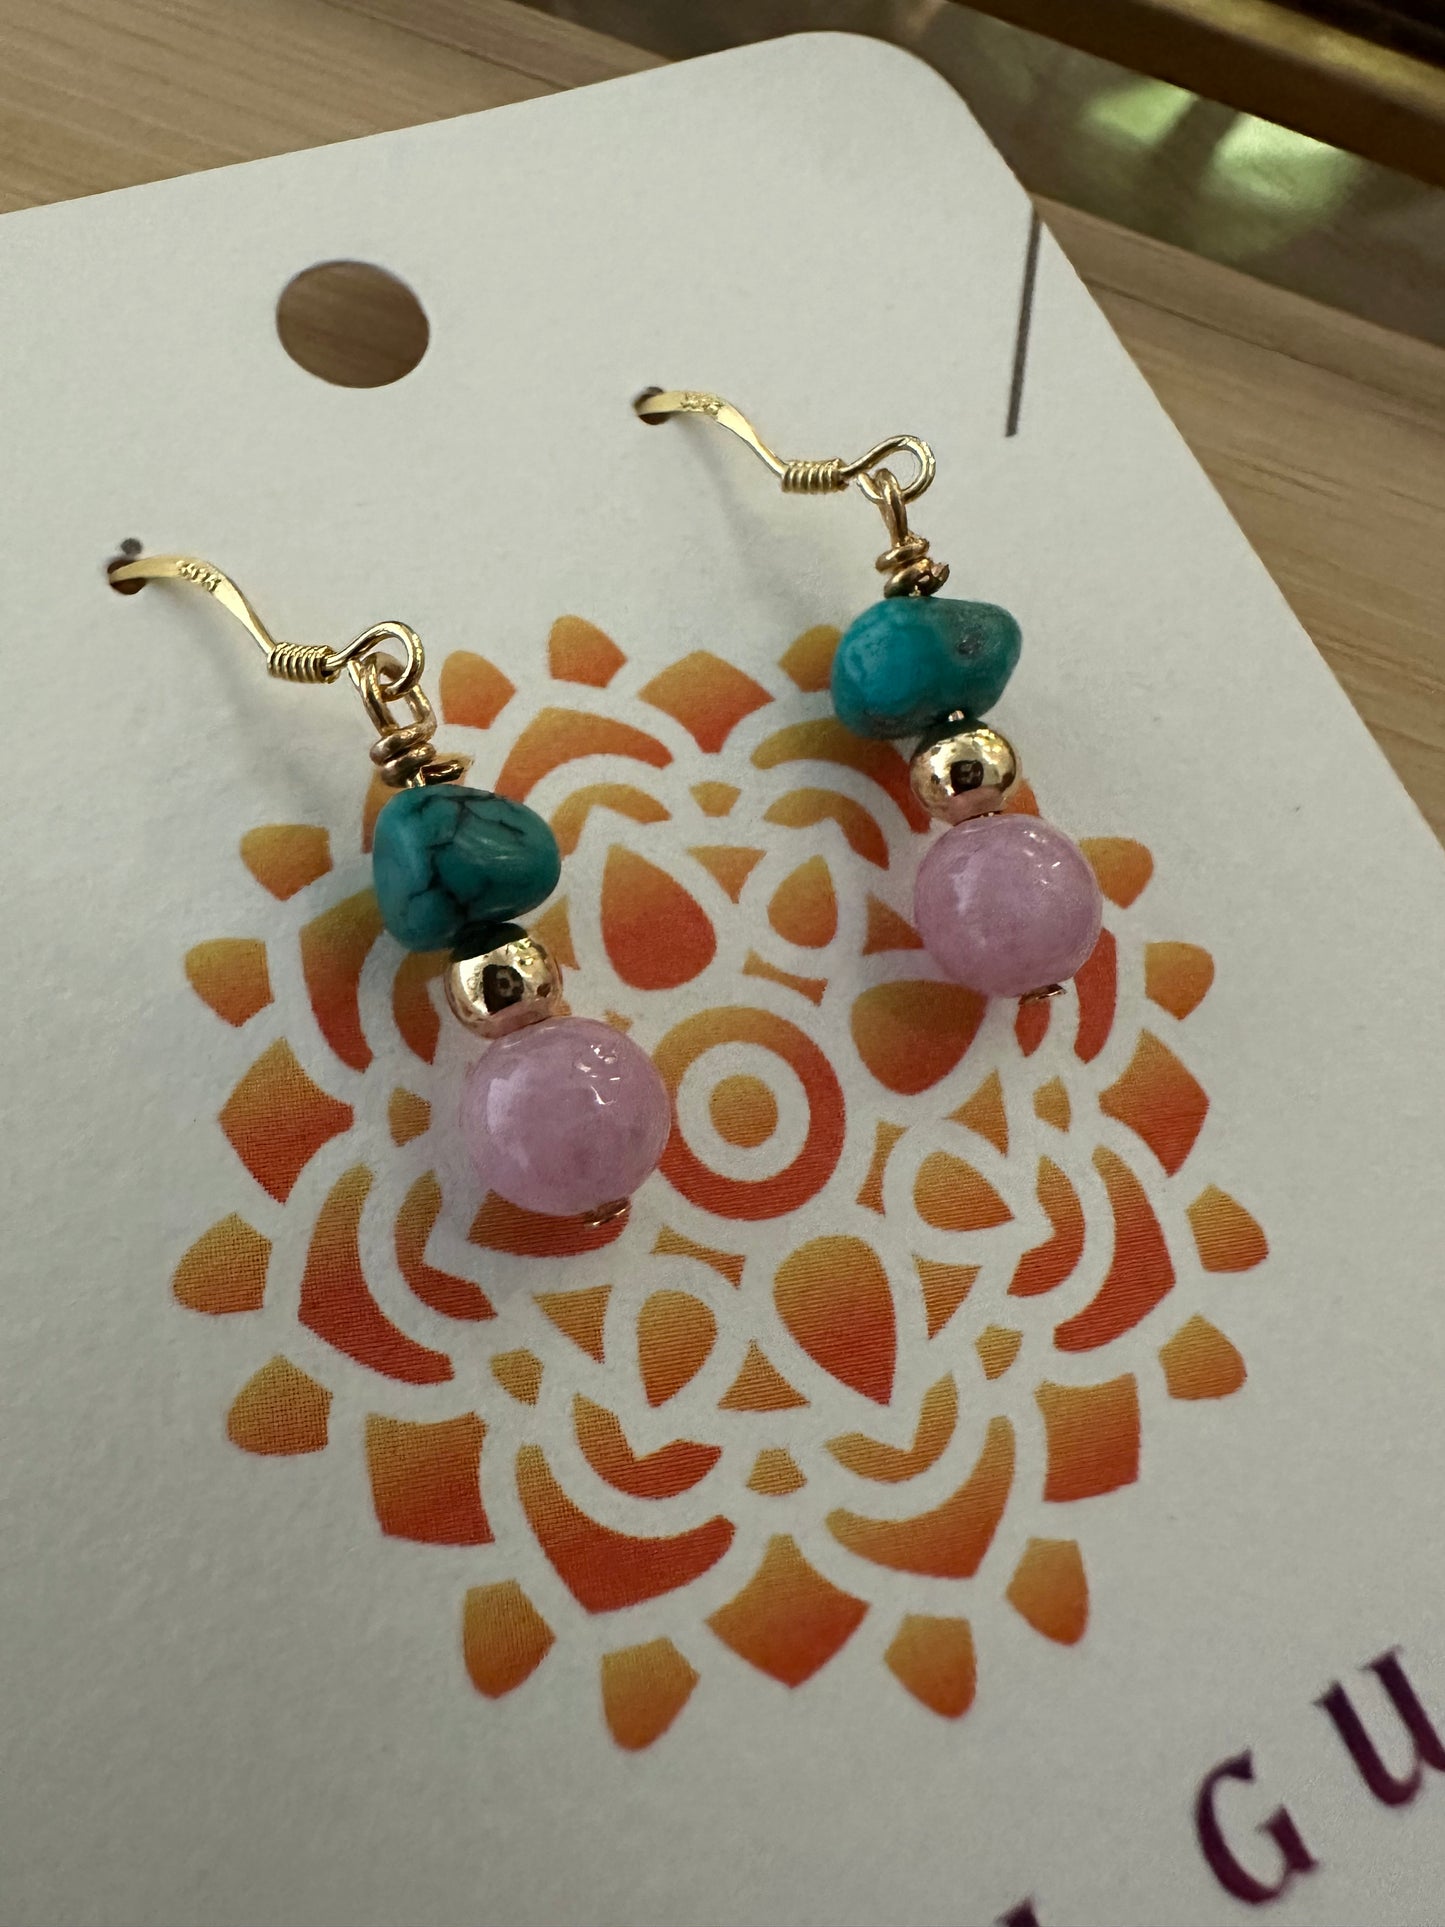 Turquoise and pink jade earrings